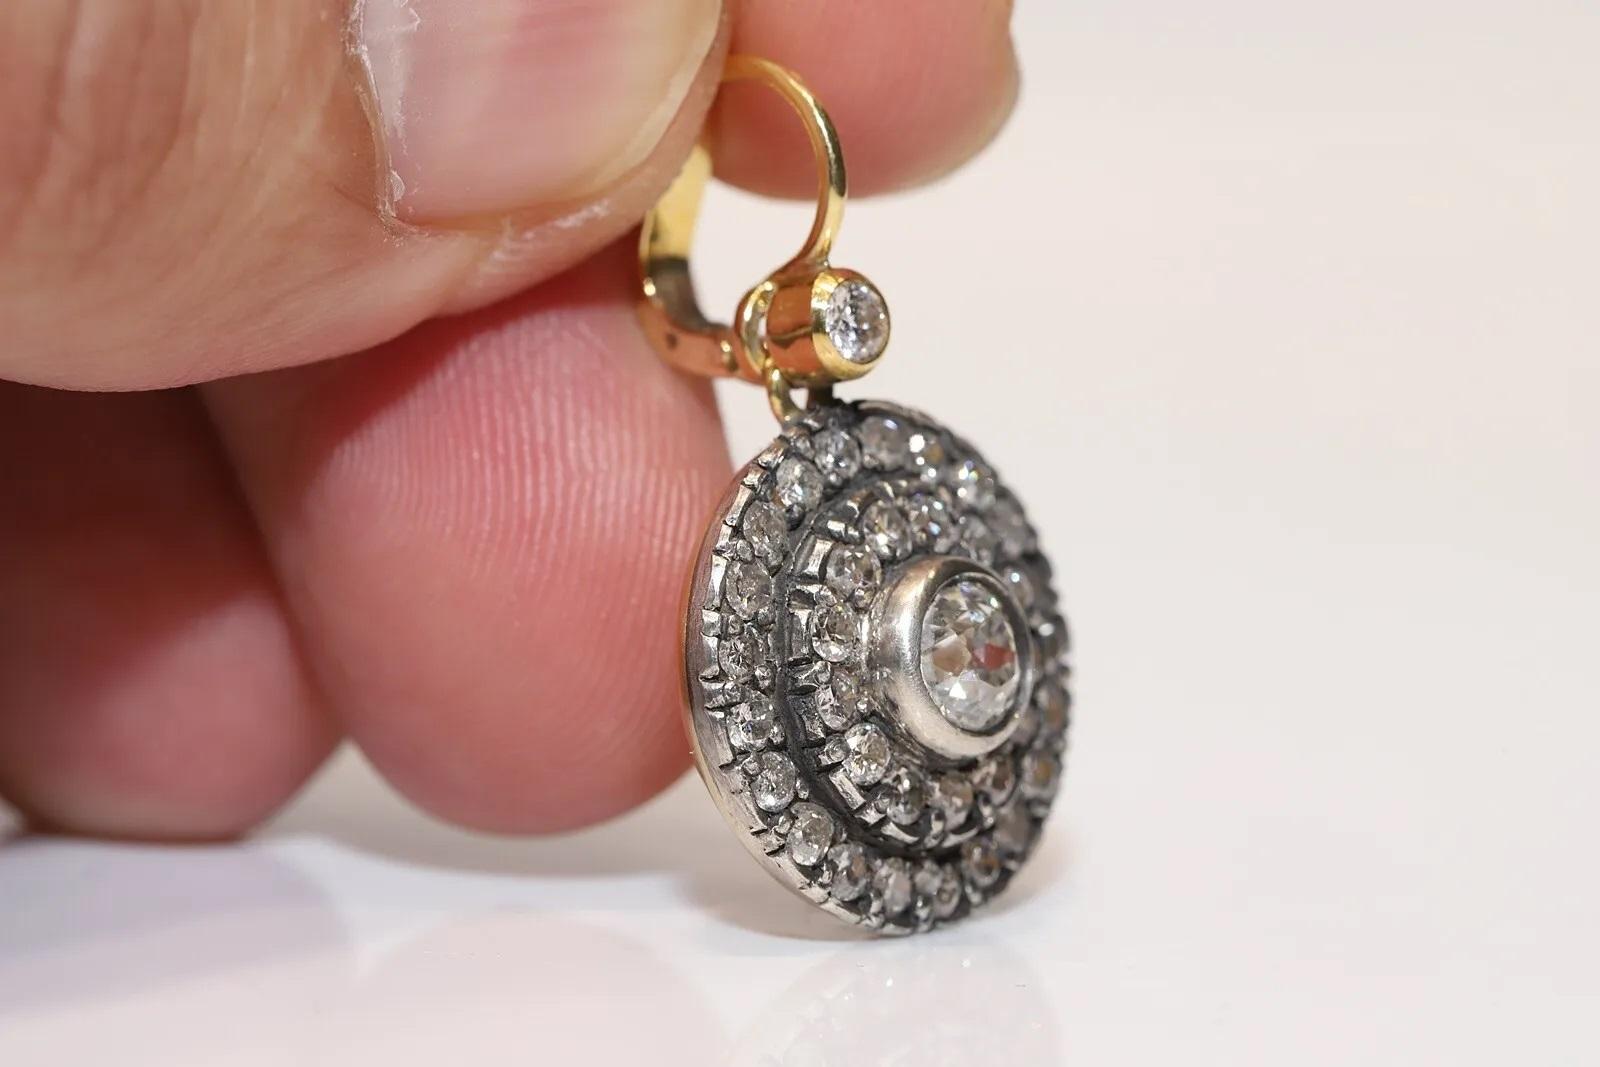 In very good condition.
Total weight is 12.2 grams.
Totally is center diamond 1.24 carat.
Totally is side diamond  2.52 carat.
All diamond totally is  3.76 carat.
The diamond is has  G-H-I color and vs-vvs-s1 clarity.
Box is not included.
Please